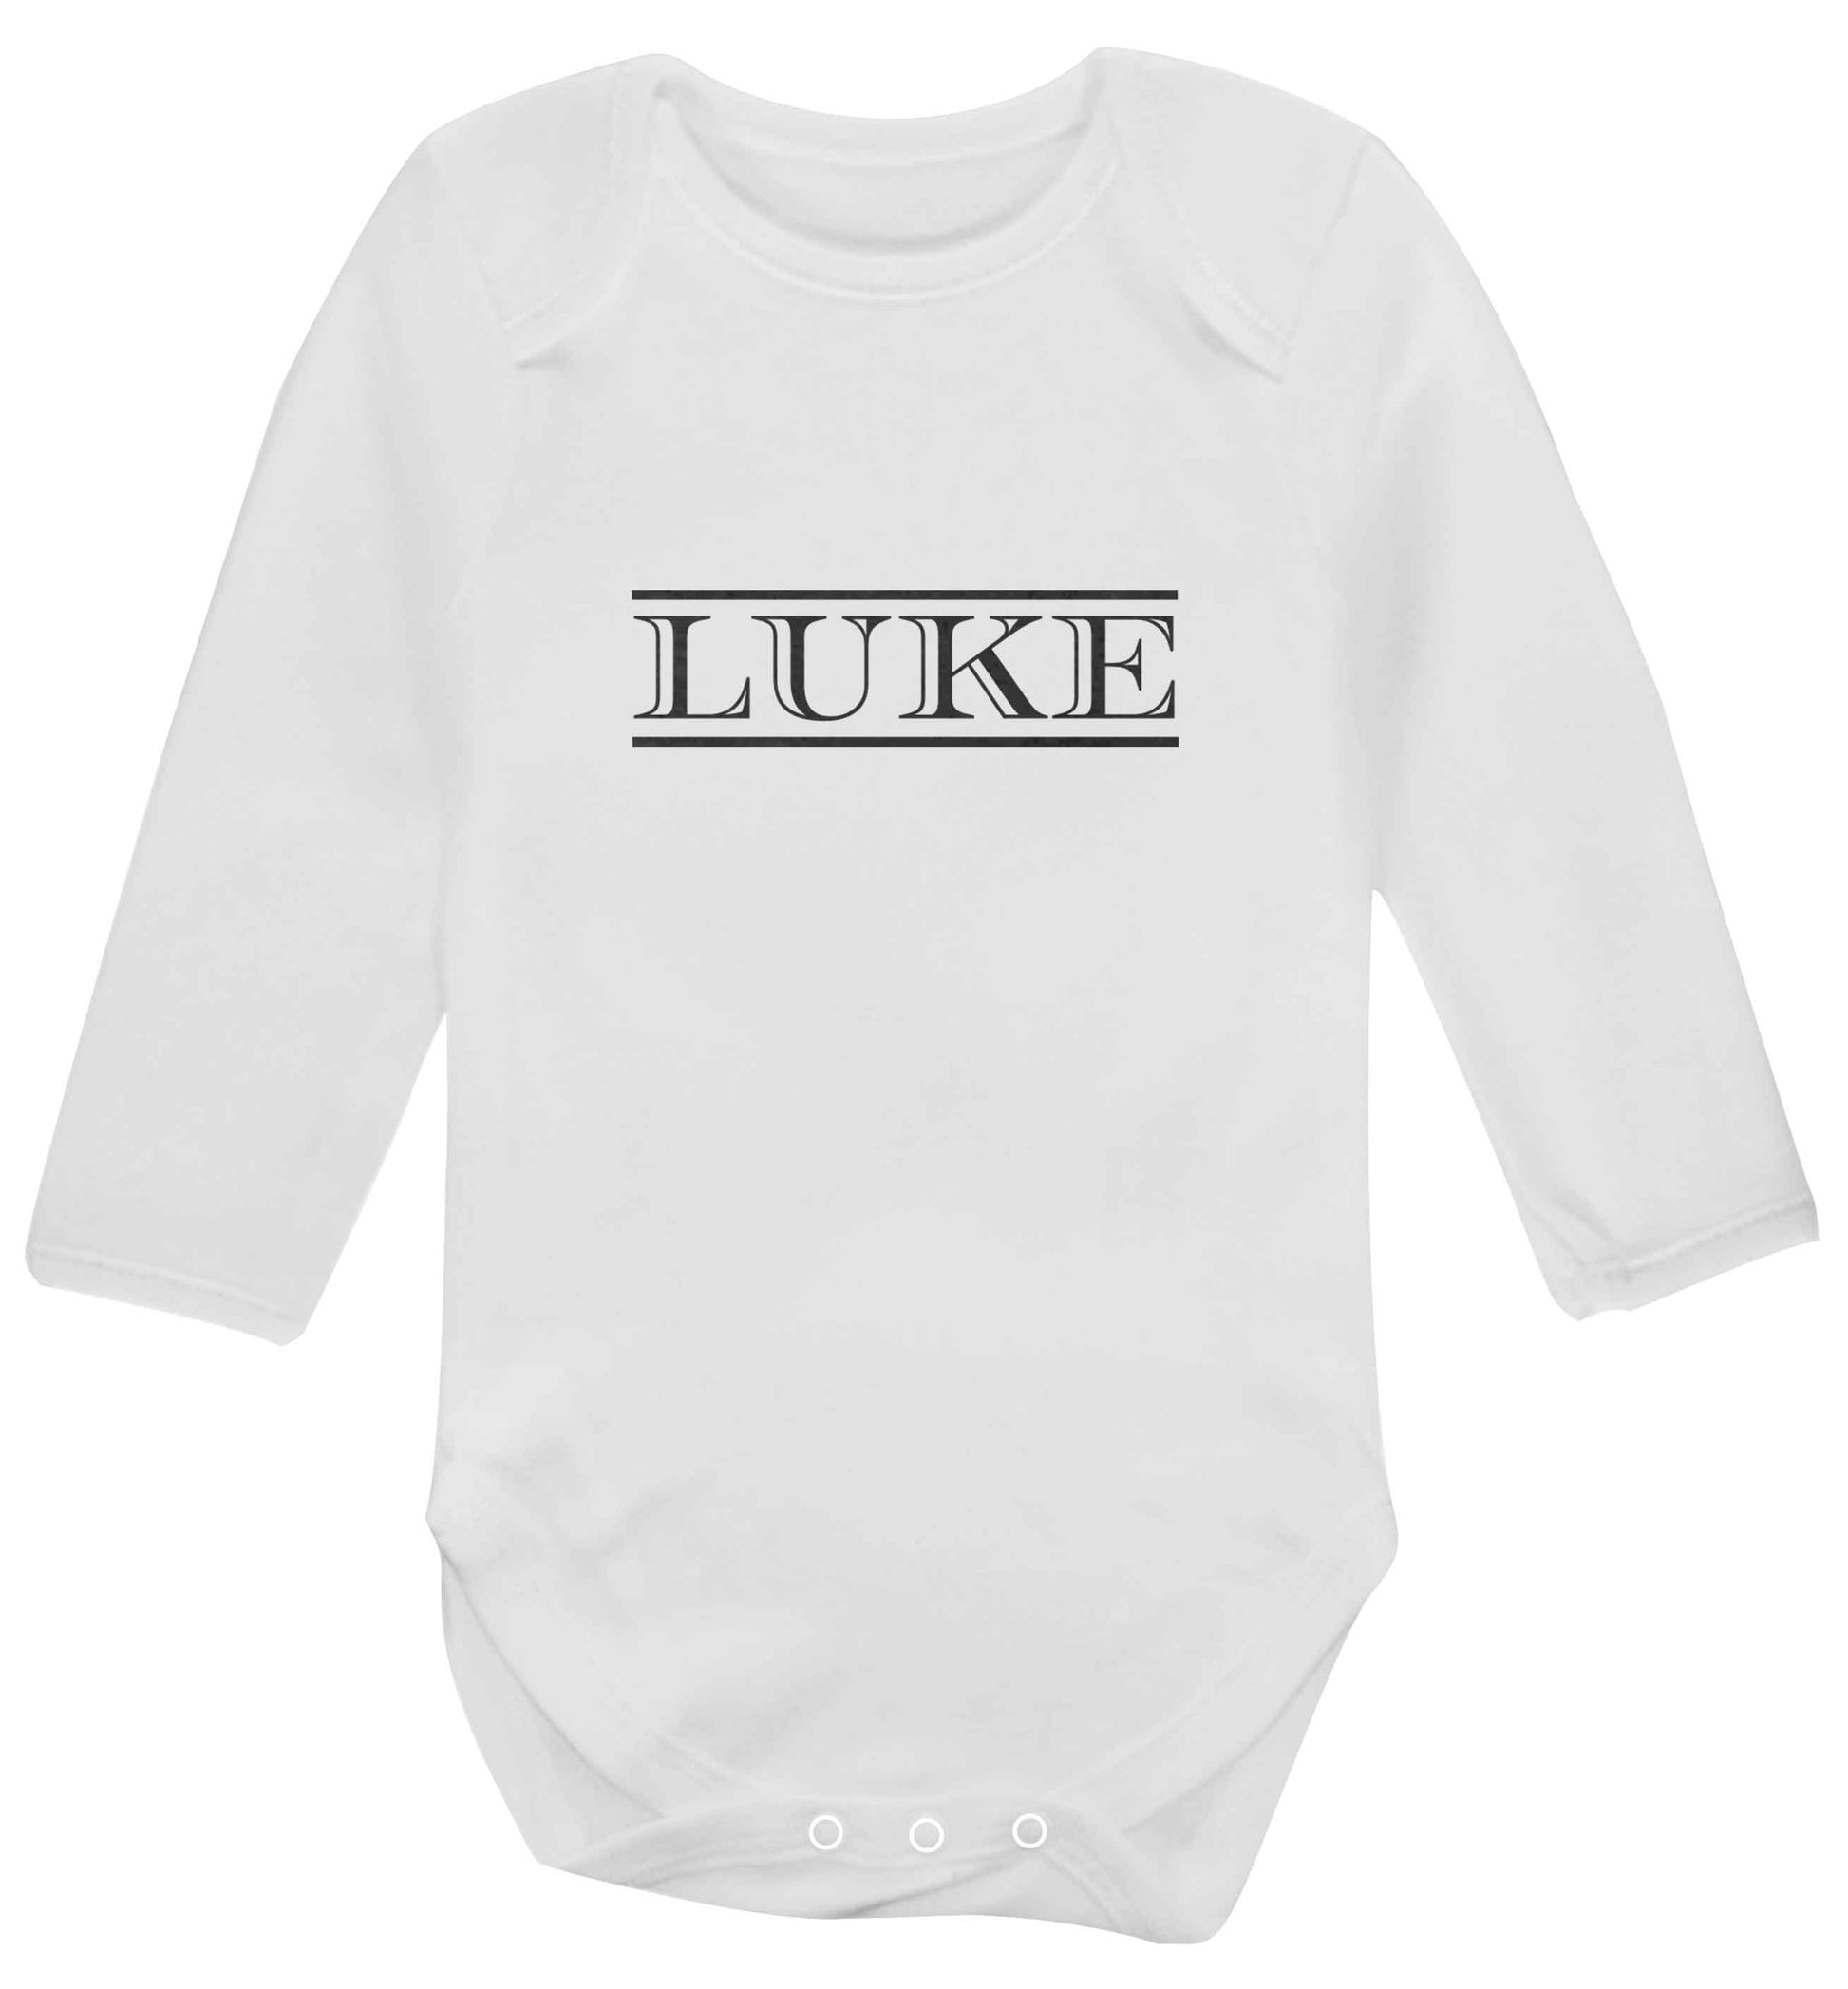 Personalised name baby vest long sleeved white 6-12 months